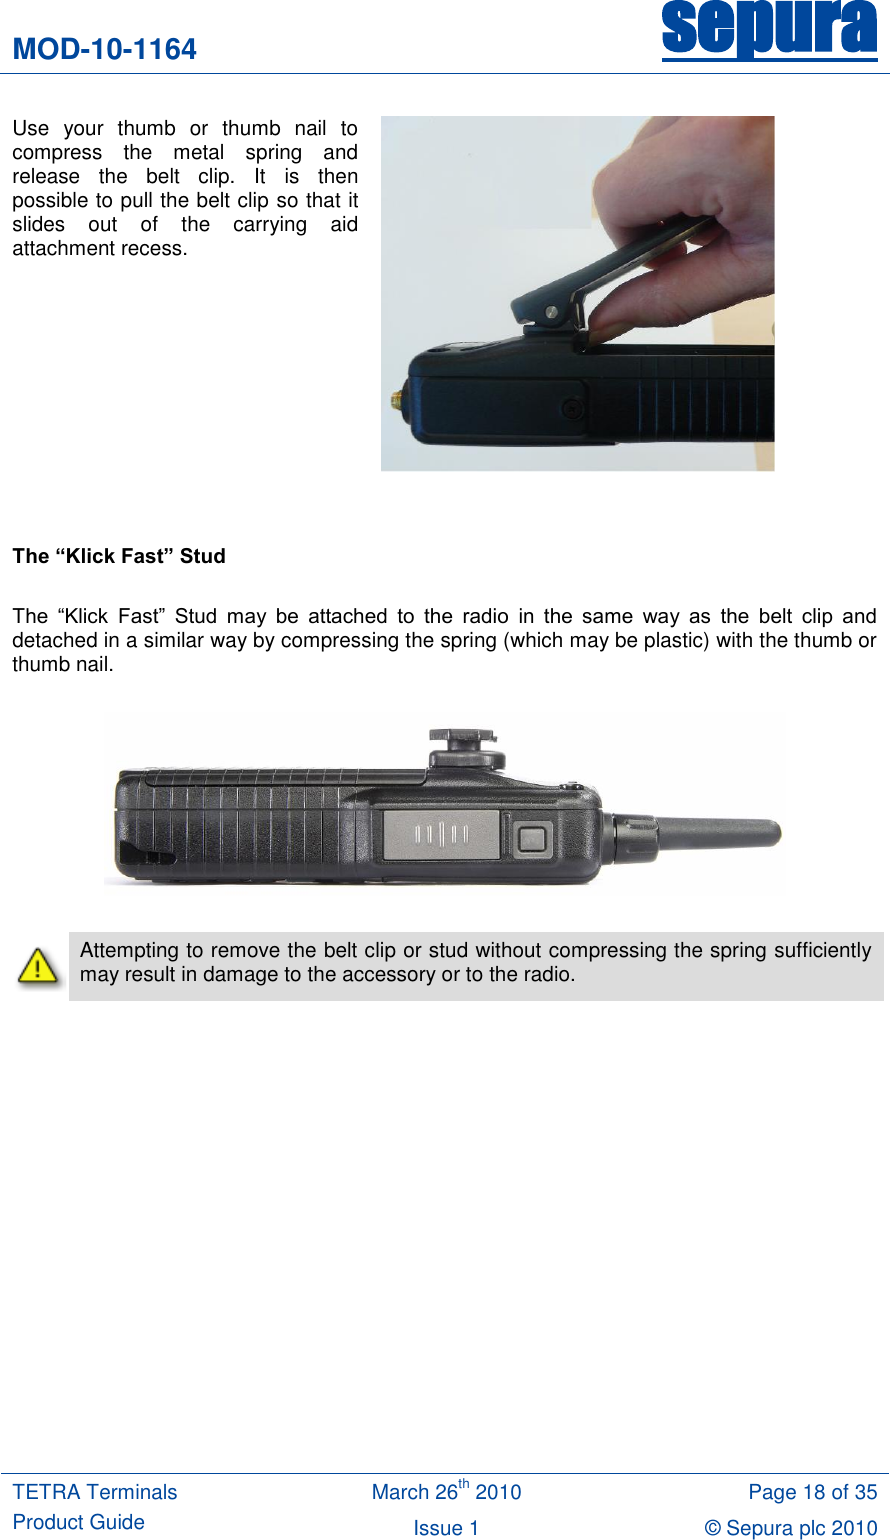 MOD-10-1164 sepura  TETRA Terminals Product Guide March 26th 2010 Page 18 of 35 Issue 1 © Sepura plc 2010   Use  your  thumb  or  thumb  nail  to compress  the  metal  spring  and release  the  belt  clip.  It  is  then possible to pull the belt clip so that it slides  out  of  the  carrying  aid attachment recess.      The “Klick Fast” Stud  The  “Klick  Fast”  Stud  may  be  attached  to  the  radio  in  the  same  way  as  the  belt  clip  and detached in a similar way by compressing the spring (which may be plastic) with the thumb or thumb nail.      Attempting to remove the belt clip or stud without compressing the spring sufficiently may result in damage to the accessory or to the radio.  